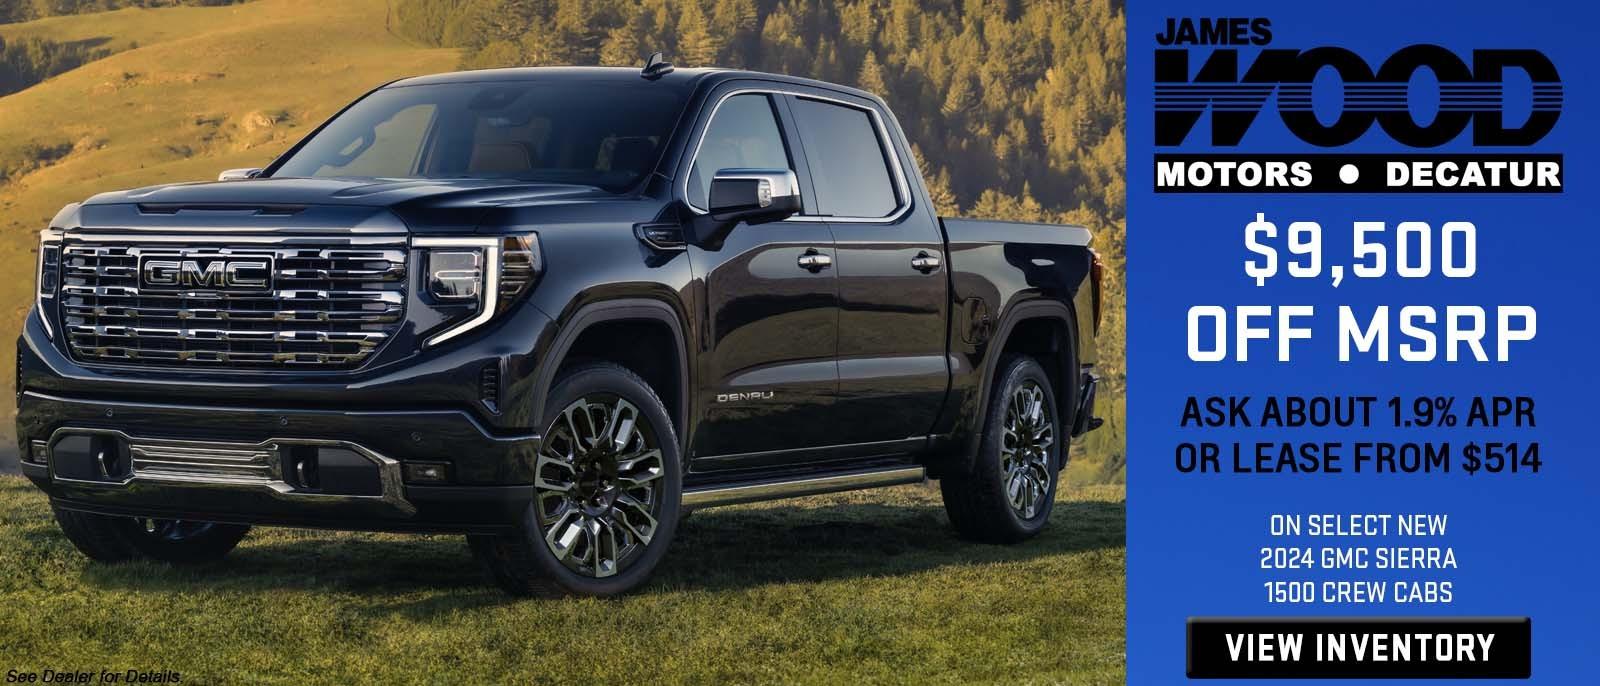 $9,500 Off MSRP, Ask about 1.9% APR or Lease from $514 on Select 2024 GMC Sierra 1500 Crew Cabs at James Wood Decatur Ft Worth Texas